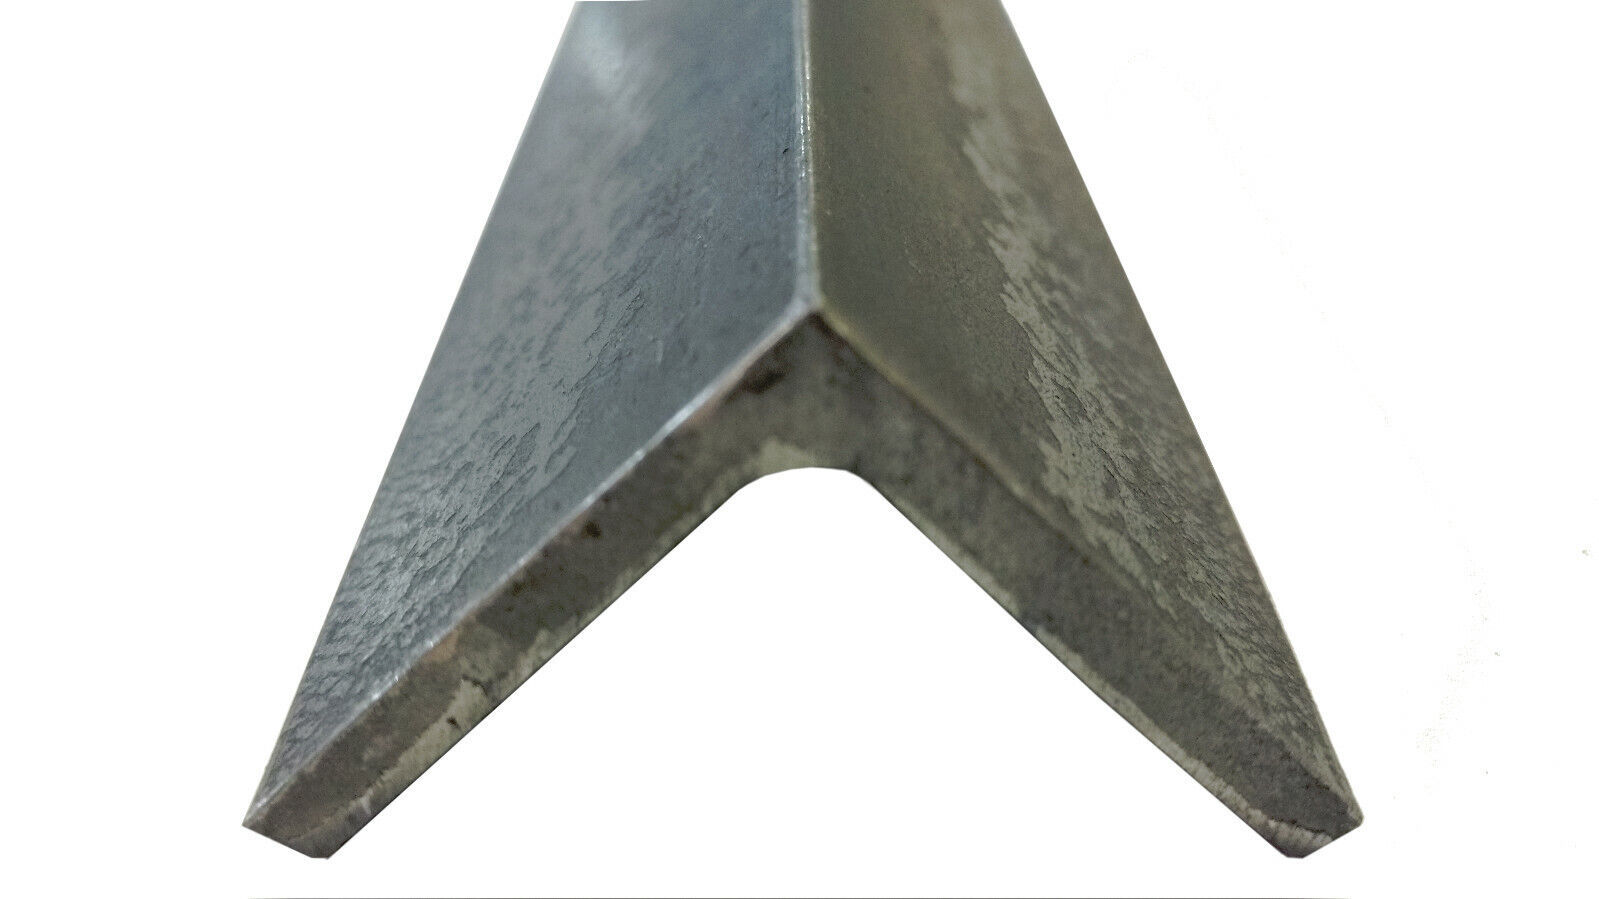 Primary image for 1 Pc of 1-1/2in x 1-1/2in x 1/4in Steel Angle Iron 48in Piece